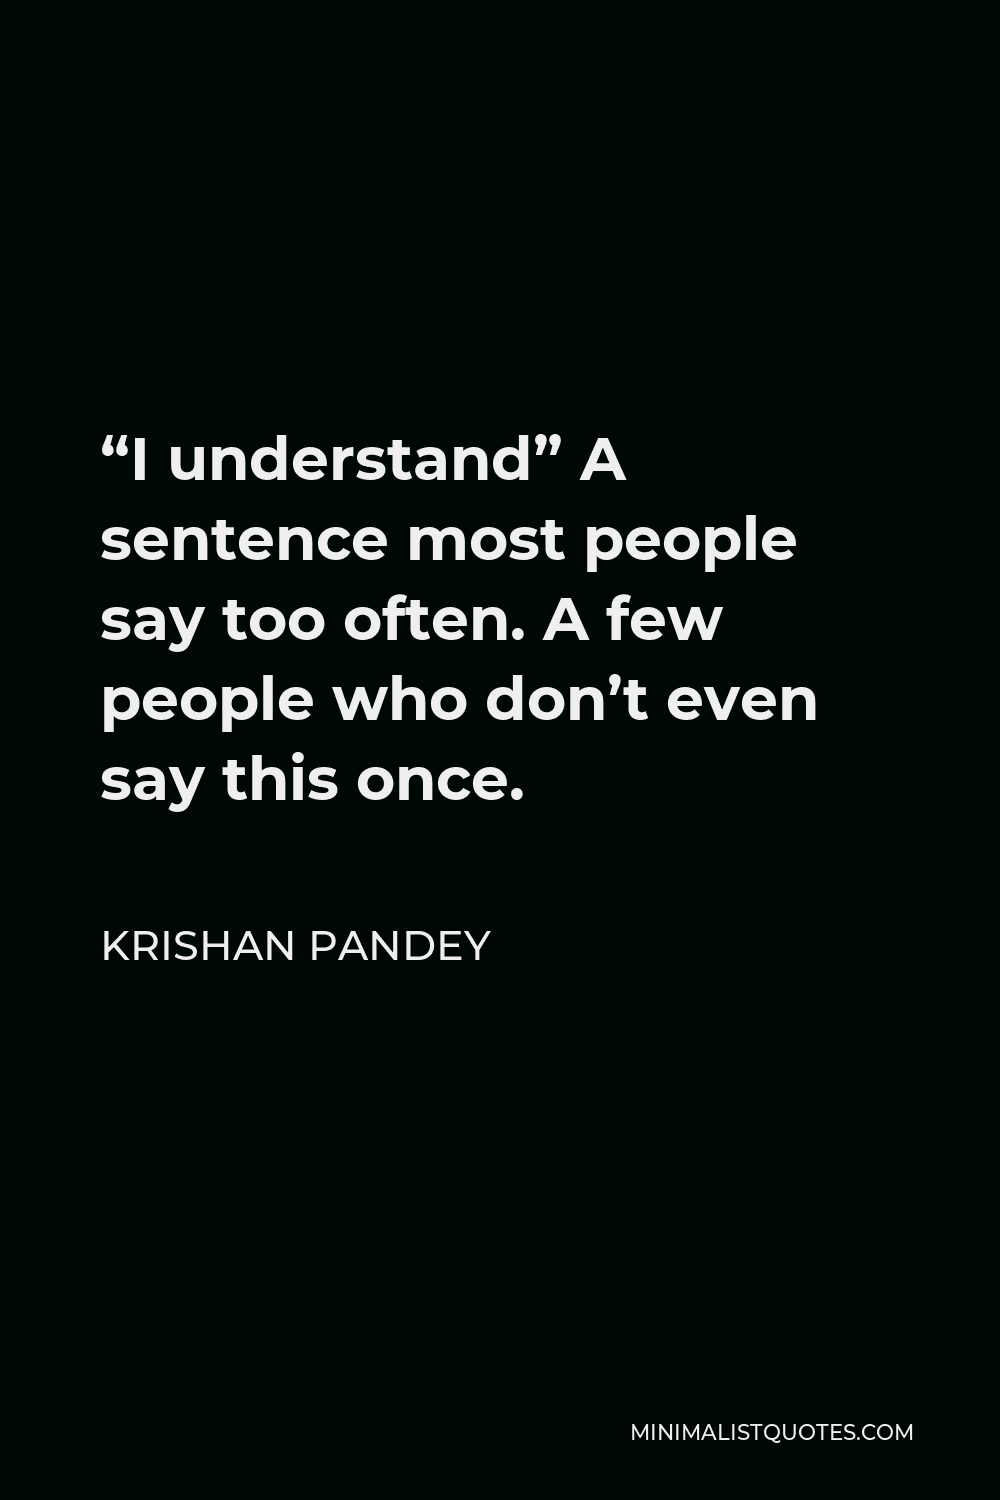 Krishan Pandey Quote - “I understand” A sentence most people say too often. A few people who don’t even say this once.